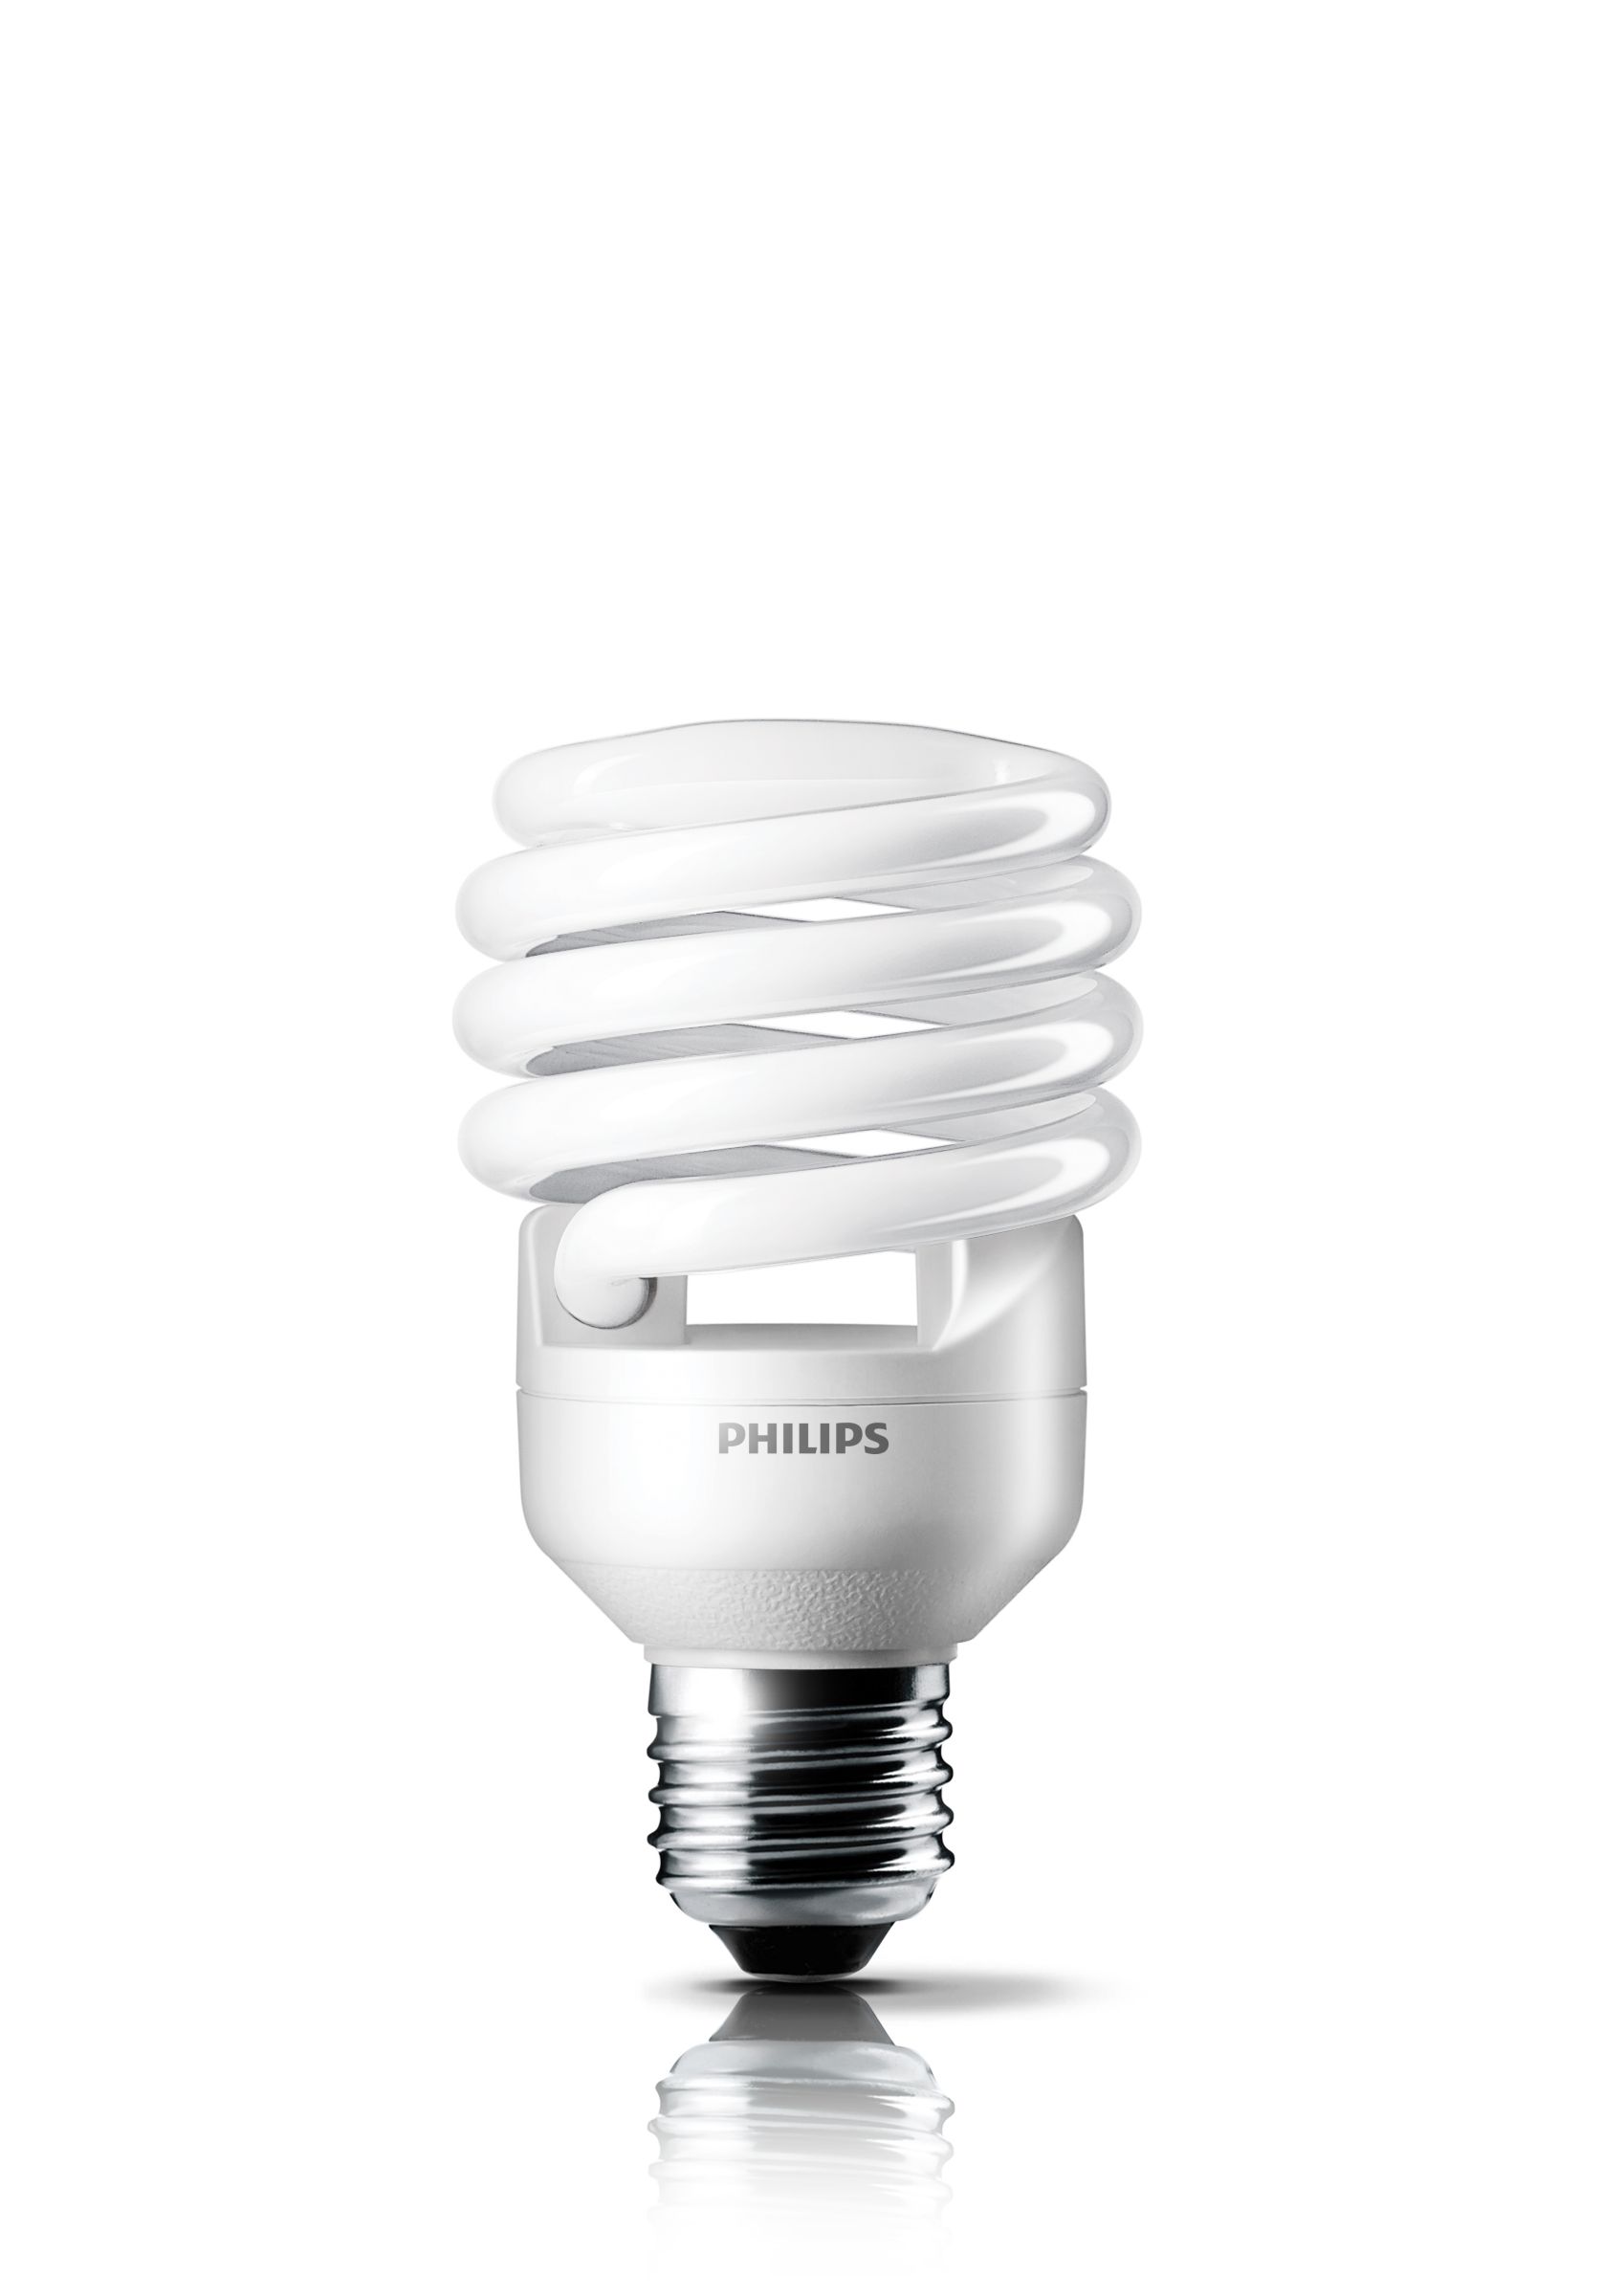 Image result for philips EcoBright Spiral energy saving bulb